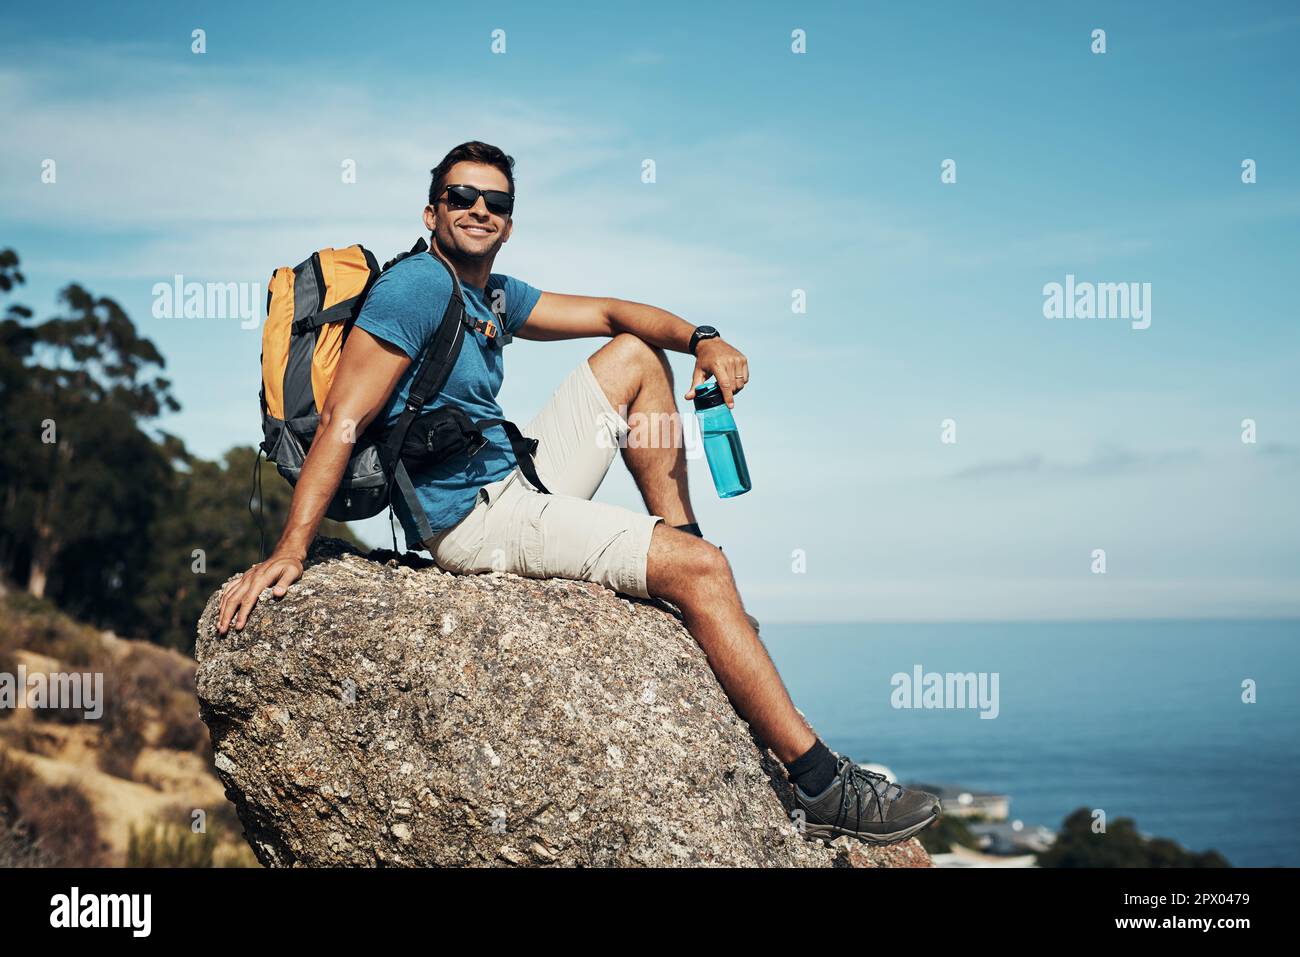 Im just hanging around. Portrait of a carefree young man taking a quick break from hiking up a mountain during the day Stock Photo